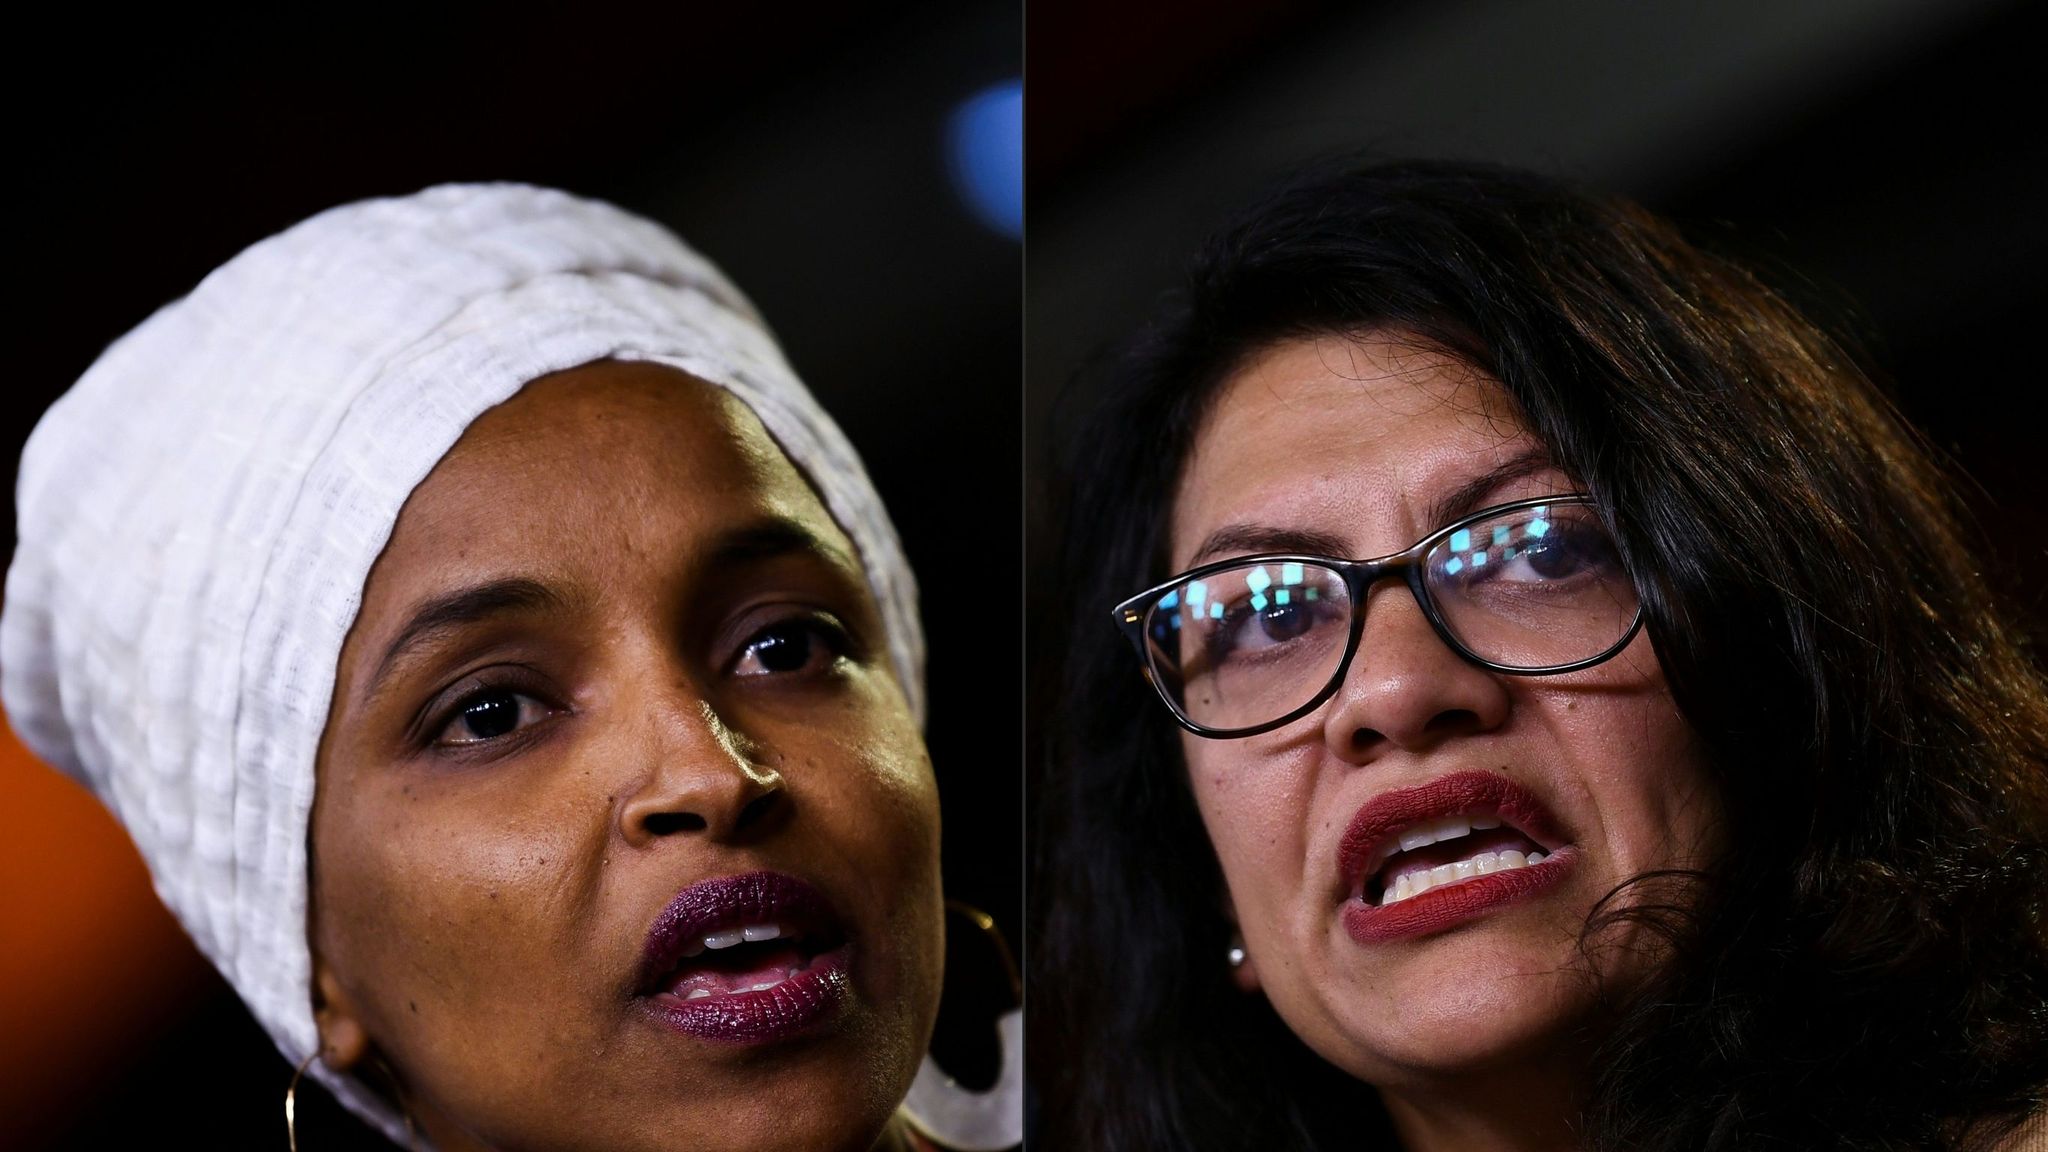 By Barring Two Congresswomen, Trump and Netanyahu Set a Trap for Democrats